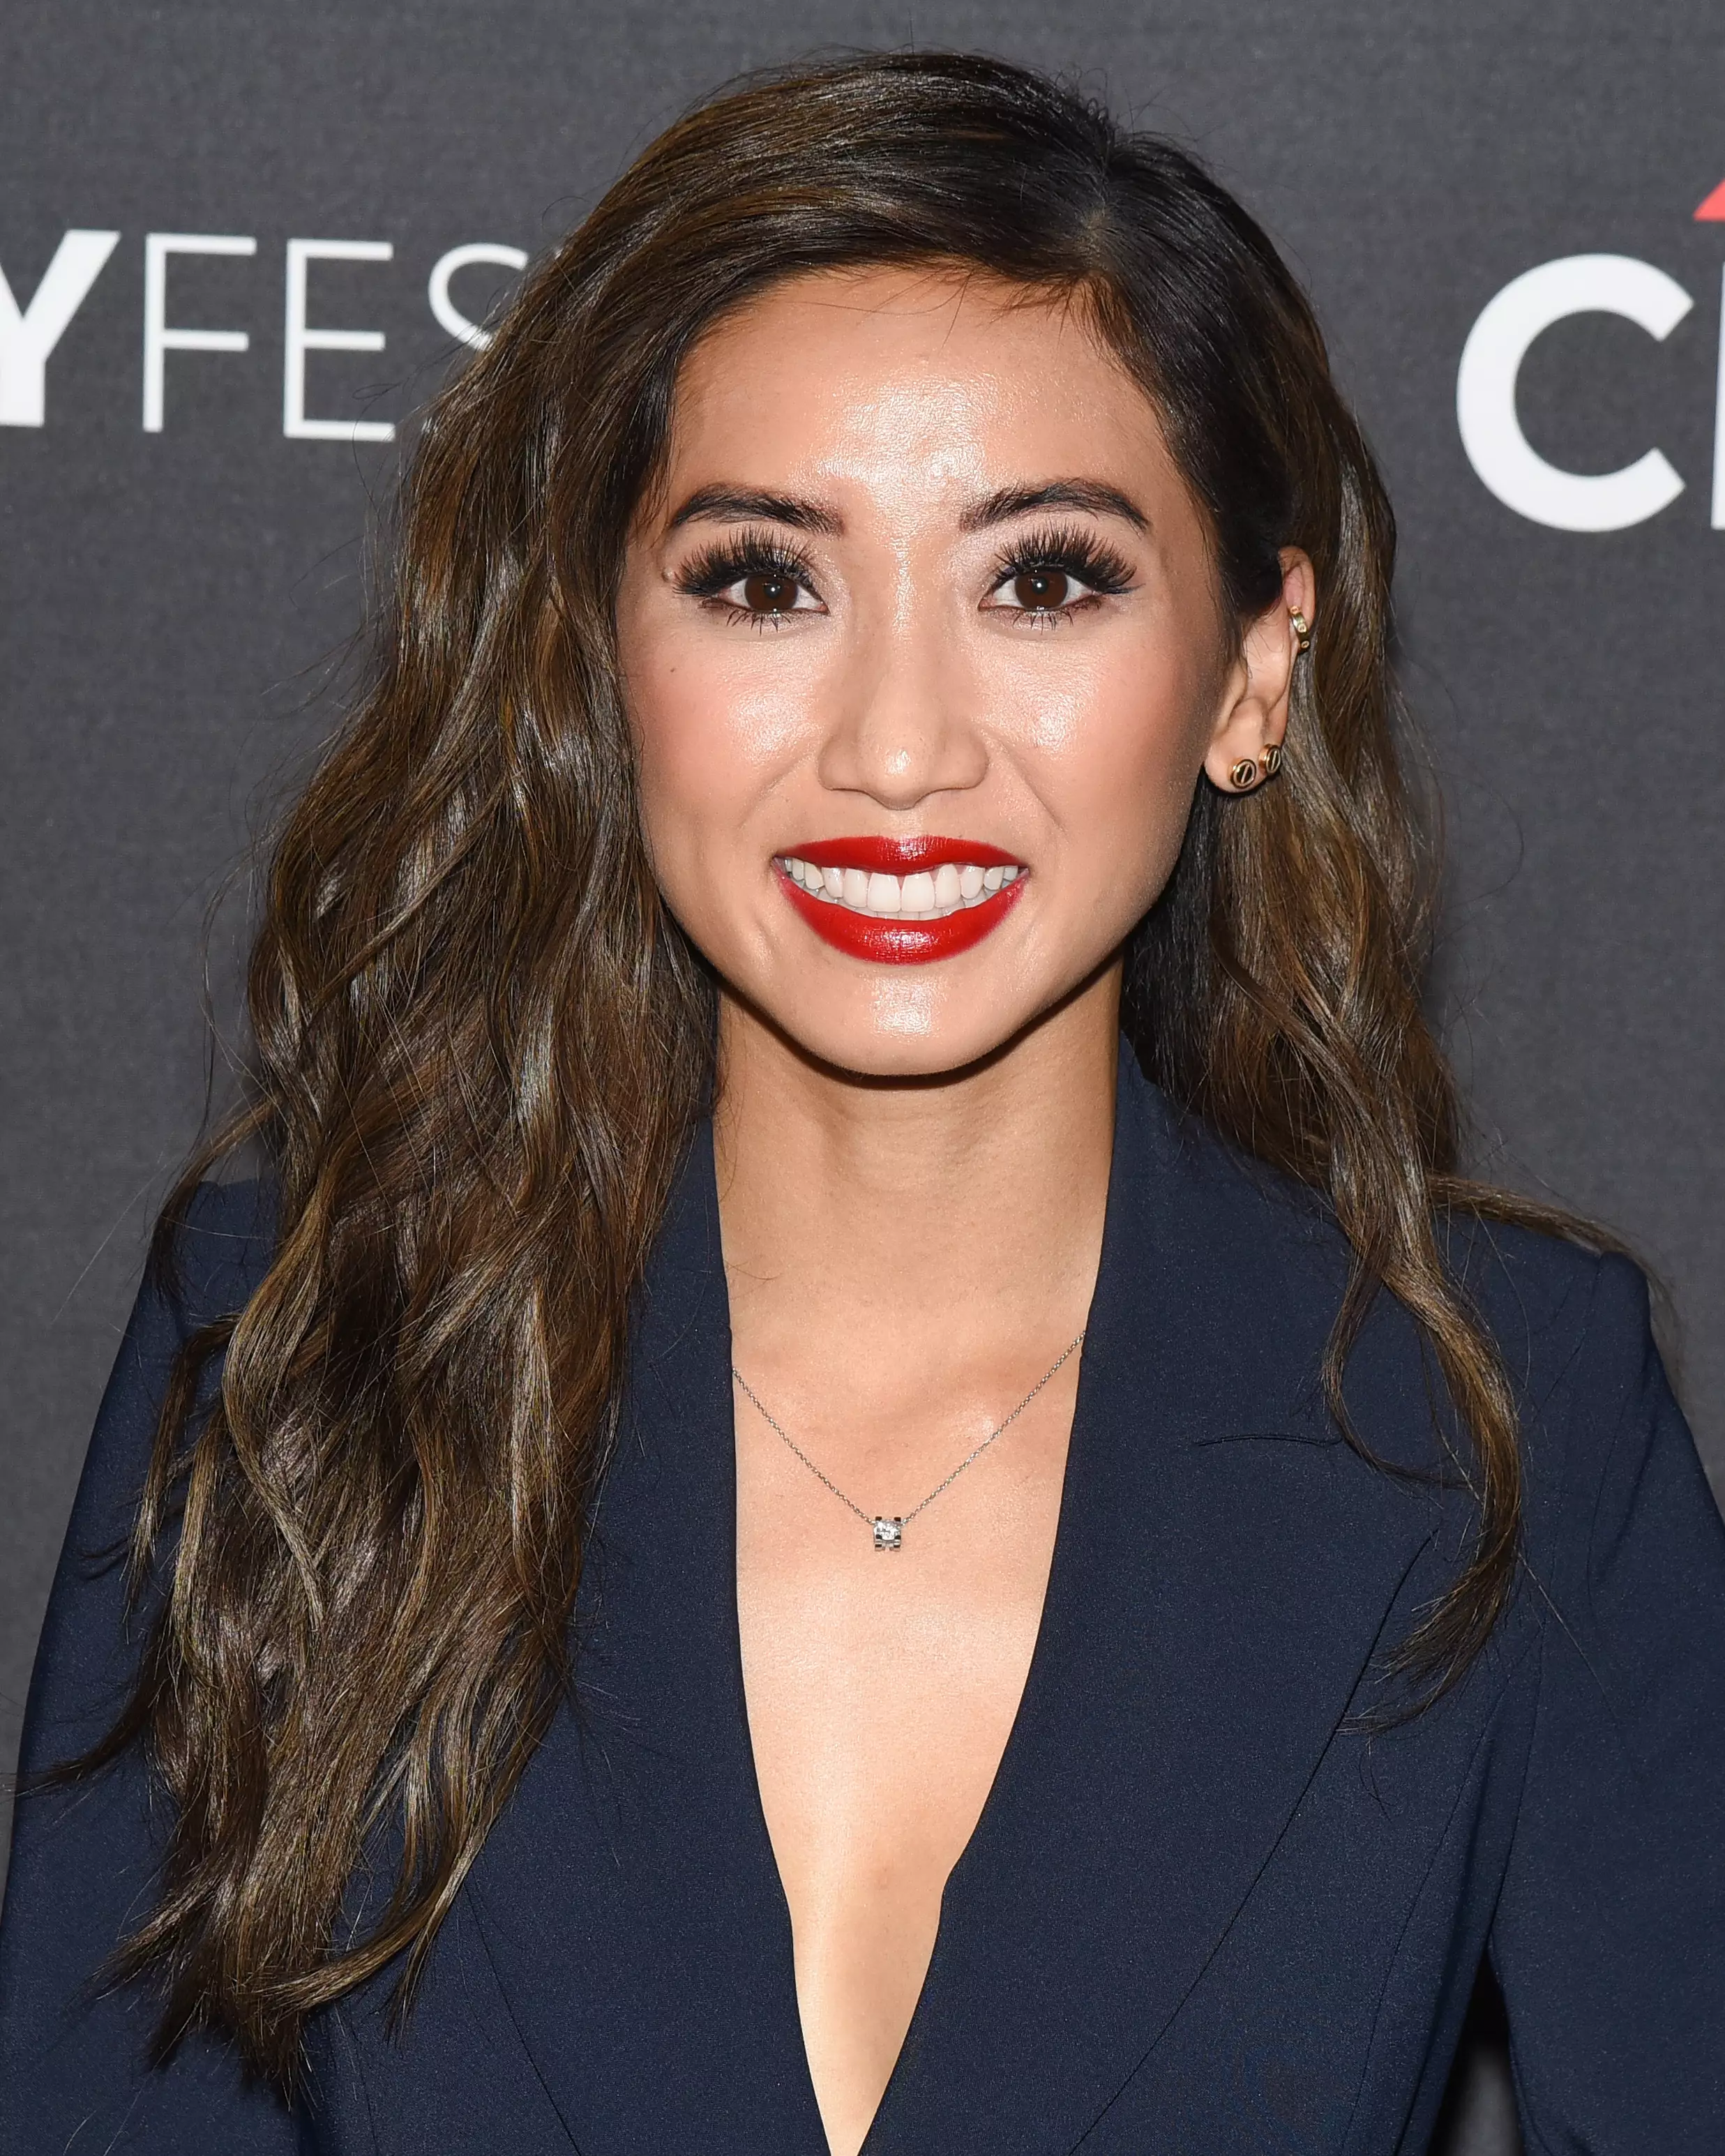 Brenda Song has given birth to her first child.